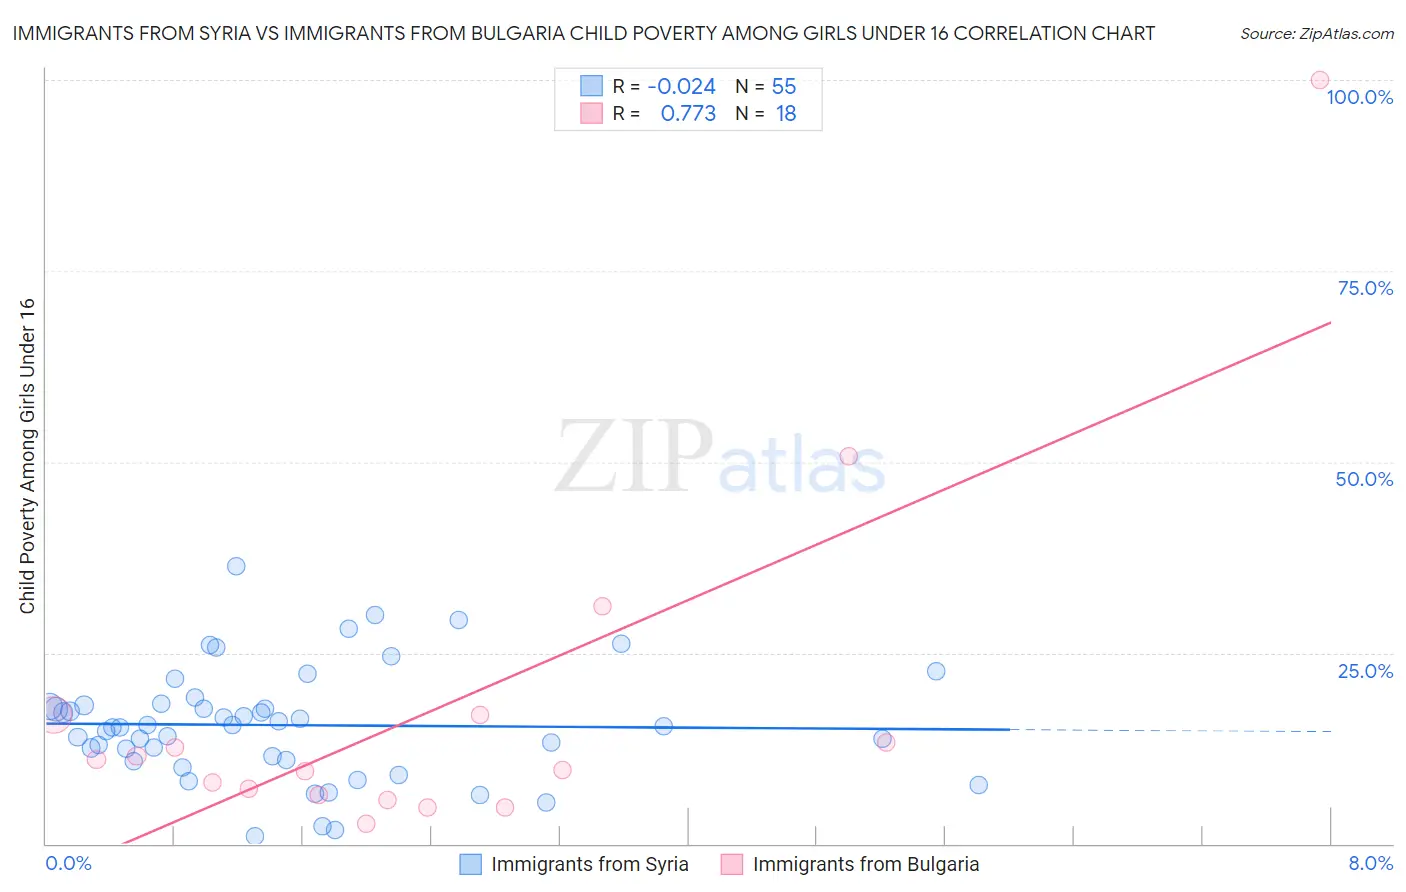 Immigrants from Syria vs Immigrants from Bulgaria Child Poverty Among Girls Under 16